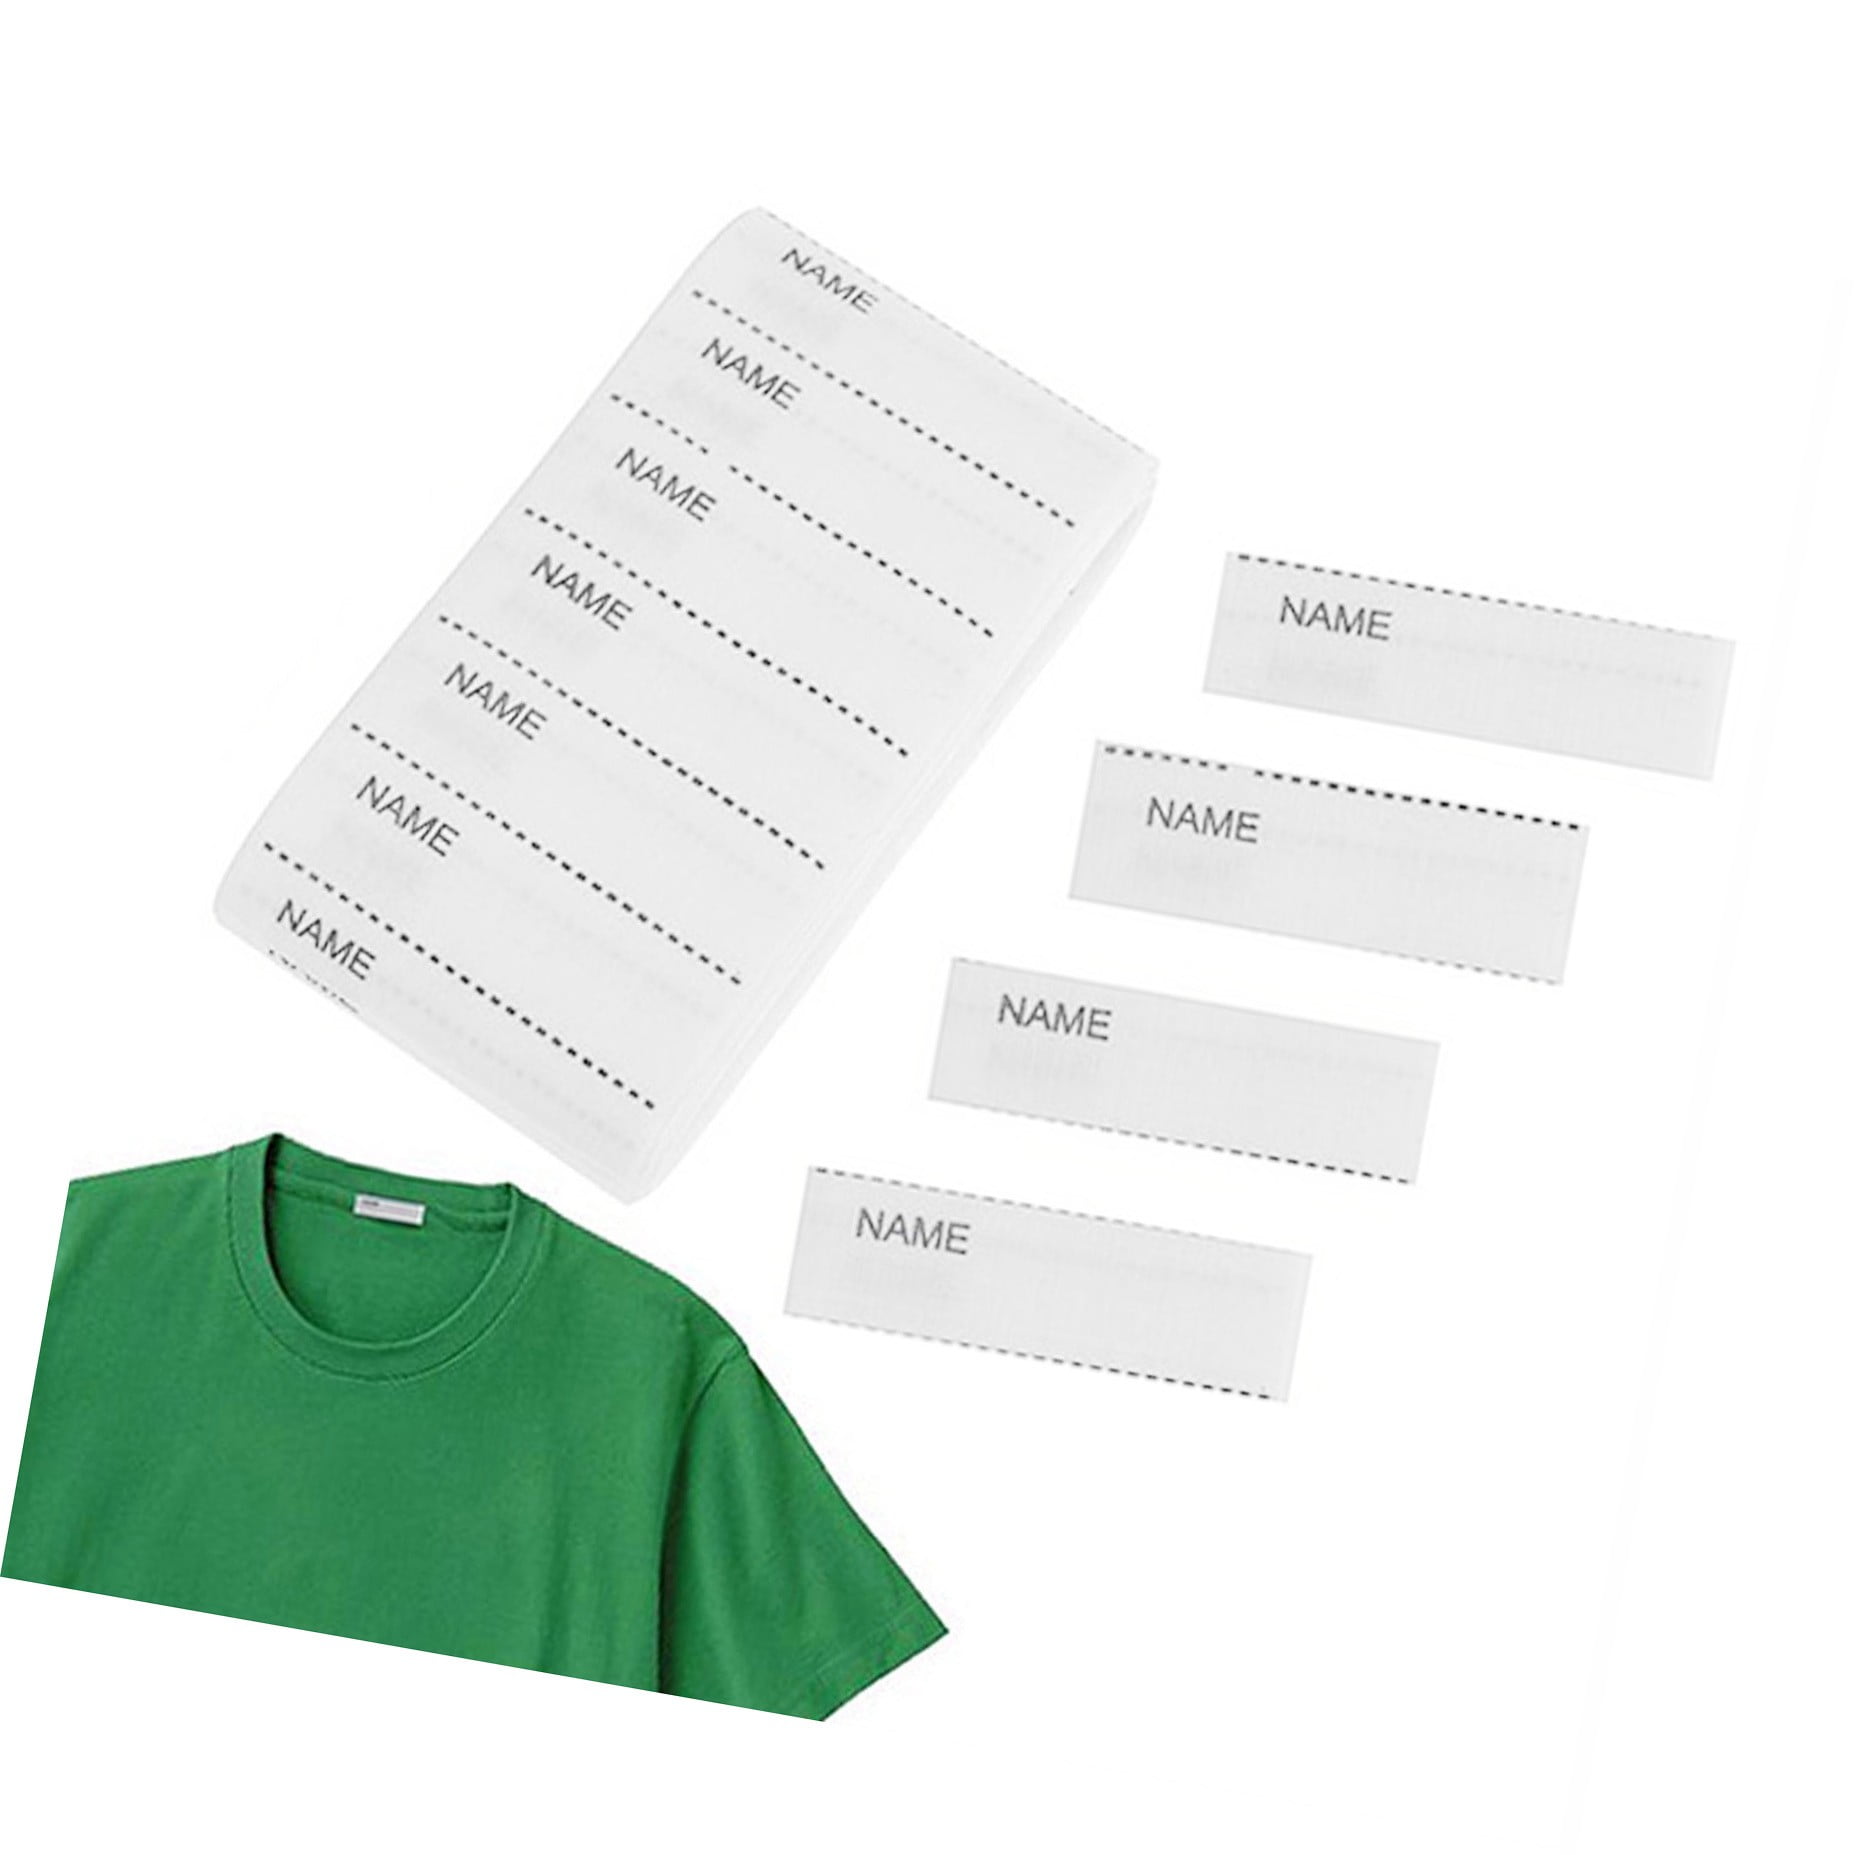 Writable Iron On Clothing Labels，Clothing Name Labels Tags,Writable Iron On  Clothing Labels 5.5cm Width Comfortable Fabrics Clothing Name Labels For  School Uniforms Laundry Room 